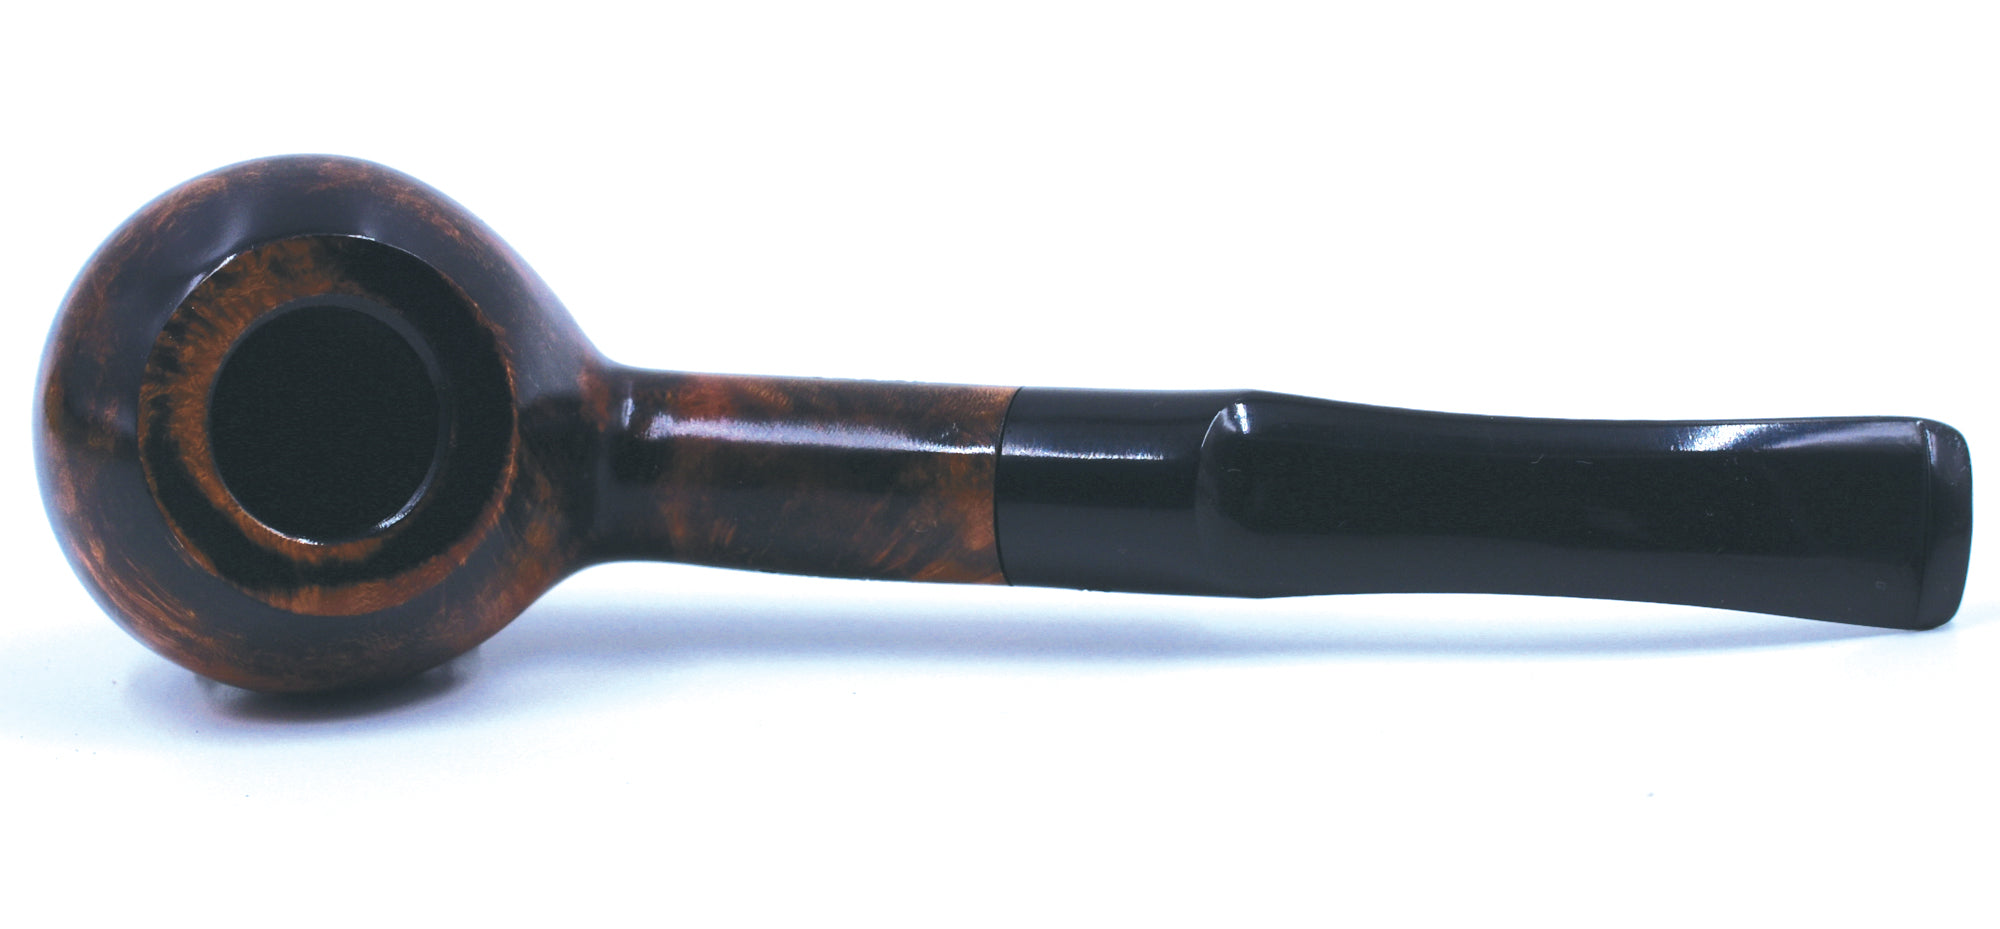 LEGENDEX® PUCCINI* 6 MM Filtered Briar Smoking Pipe Made In Italy 01-08-217